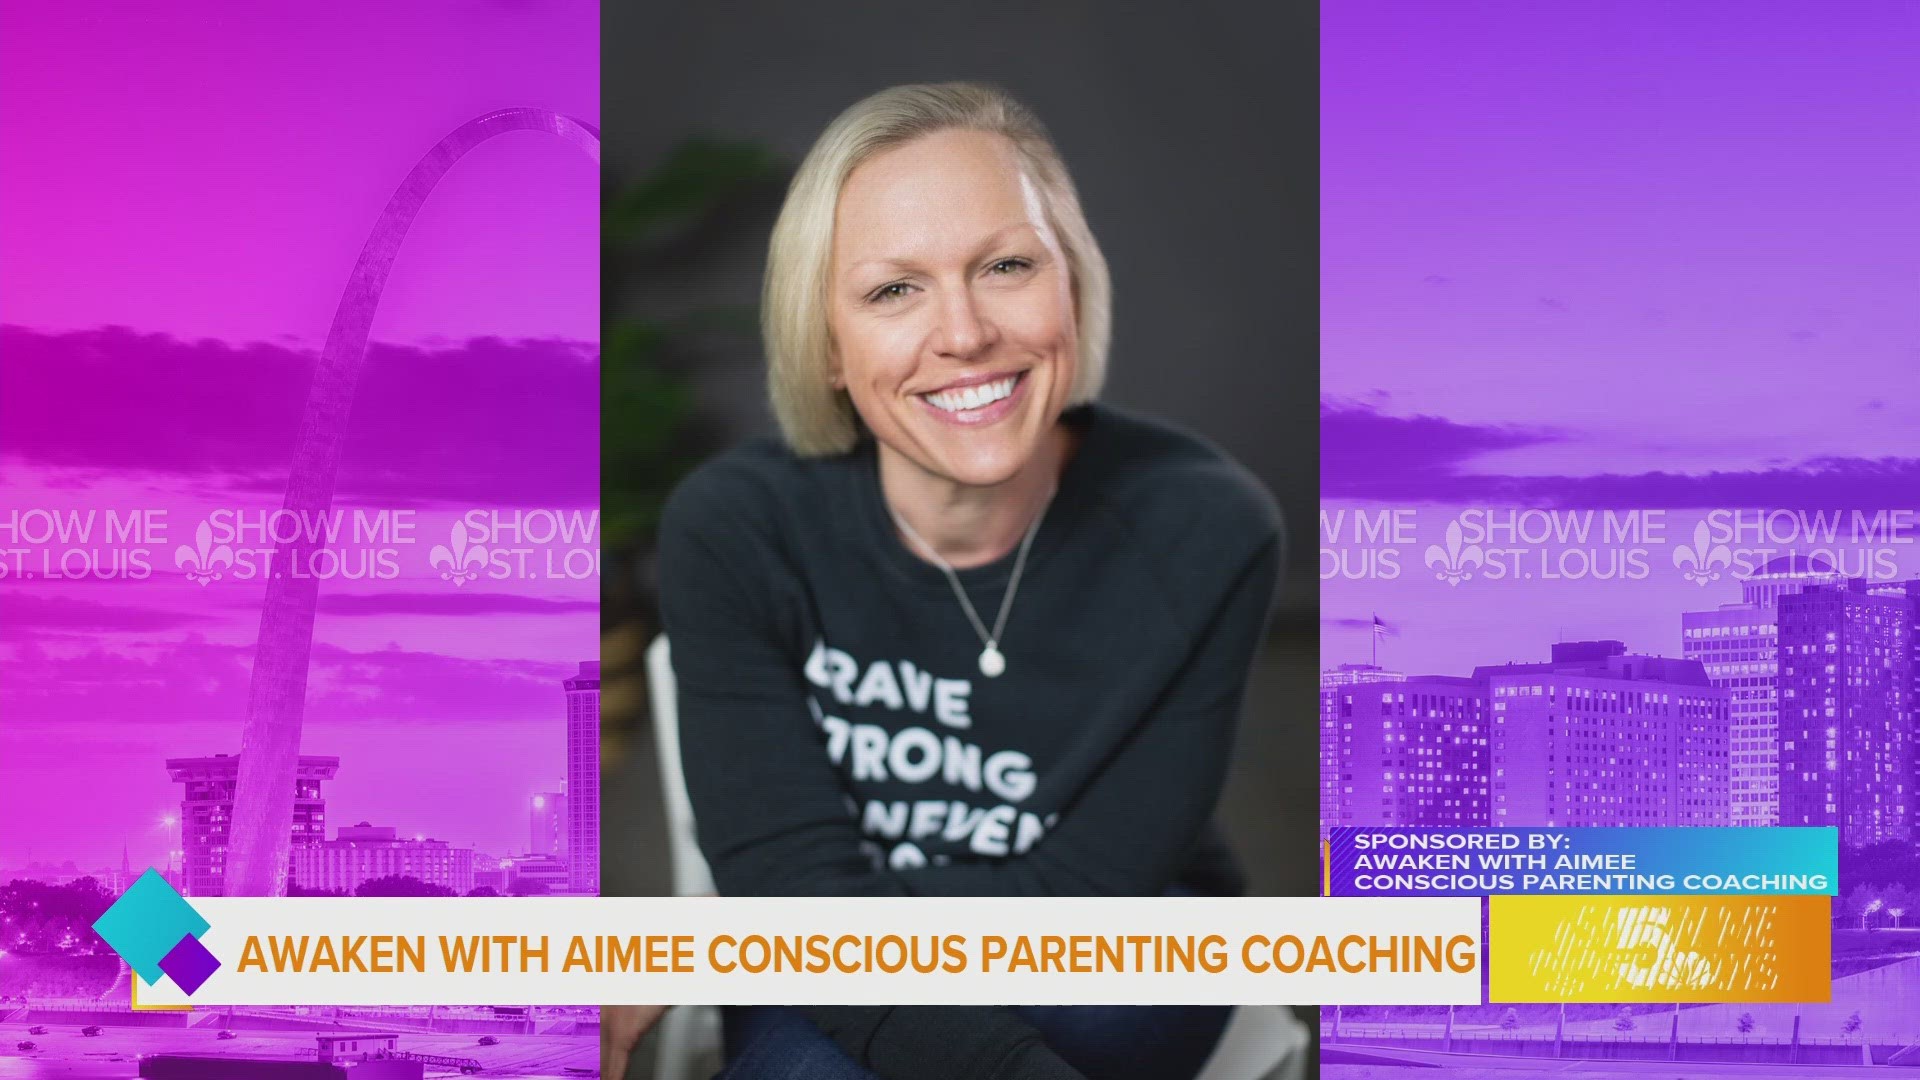 Learn about boundaries, triggers, and conscious parenting with Awaken with Aimee.